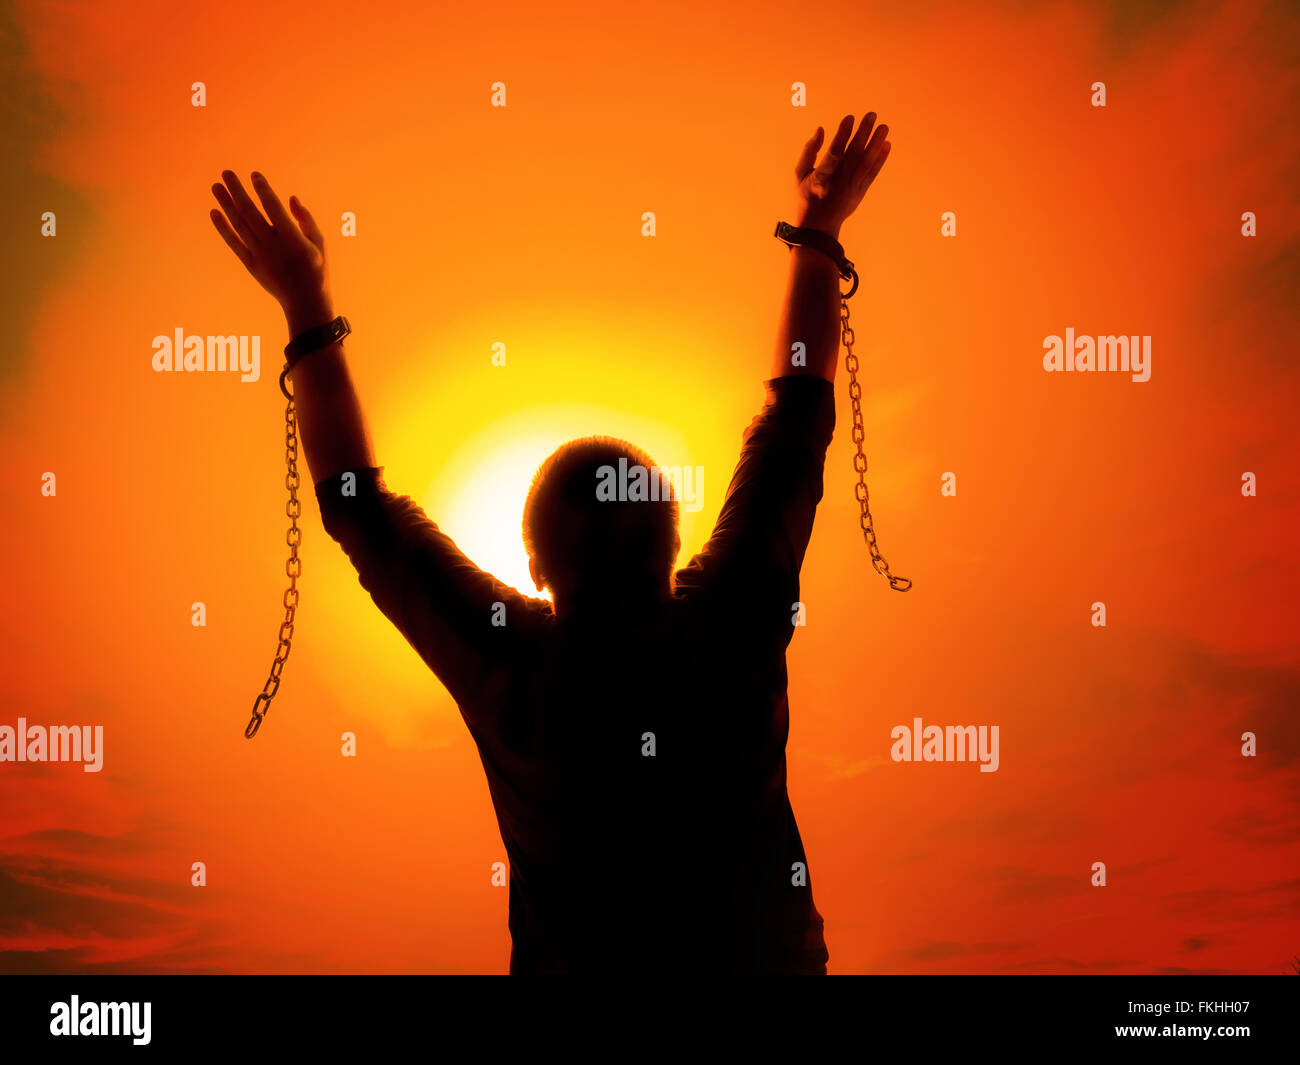 Silhouette of man against the sunset sky raising up his hands as he becomes free from chains and shackles Stock Photo